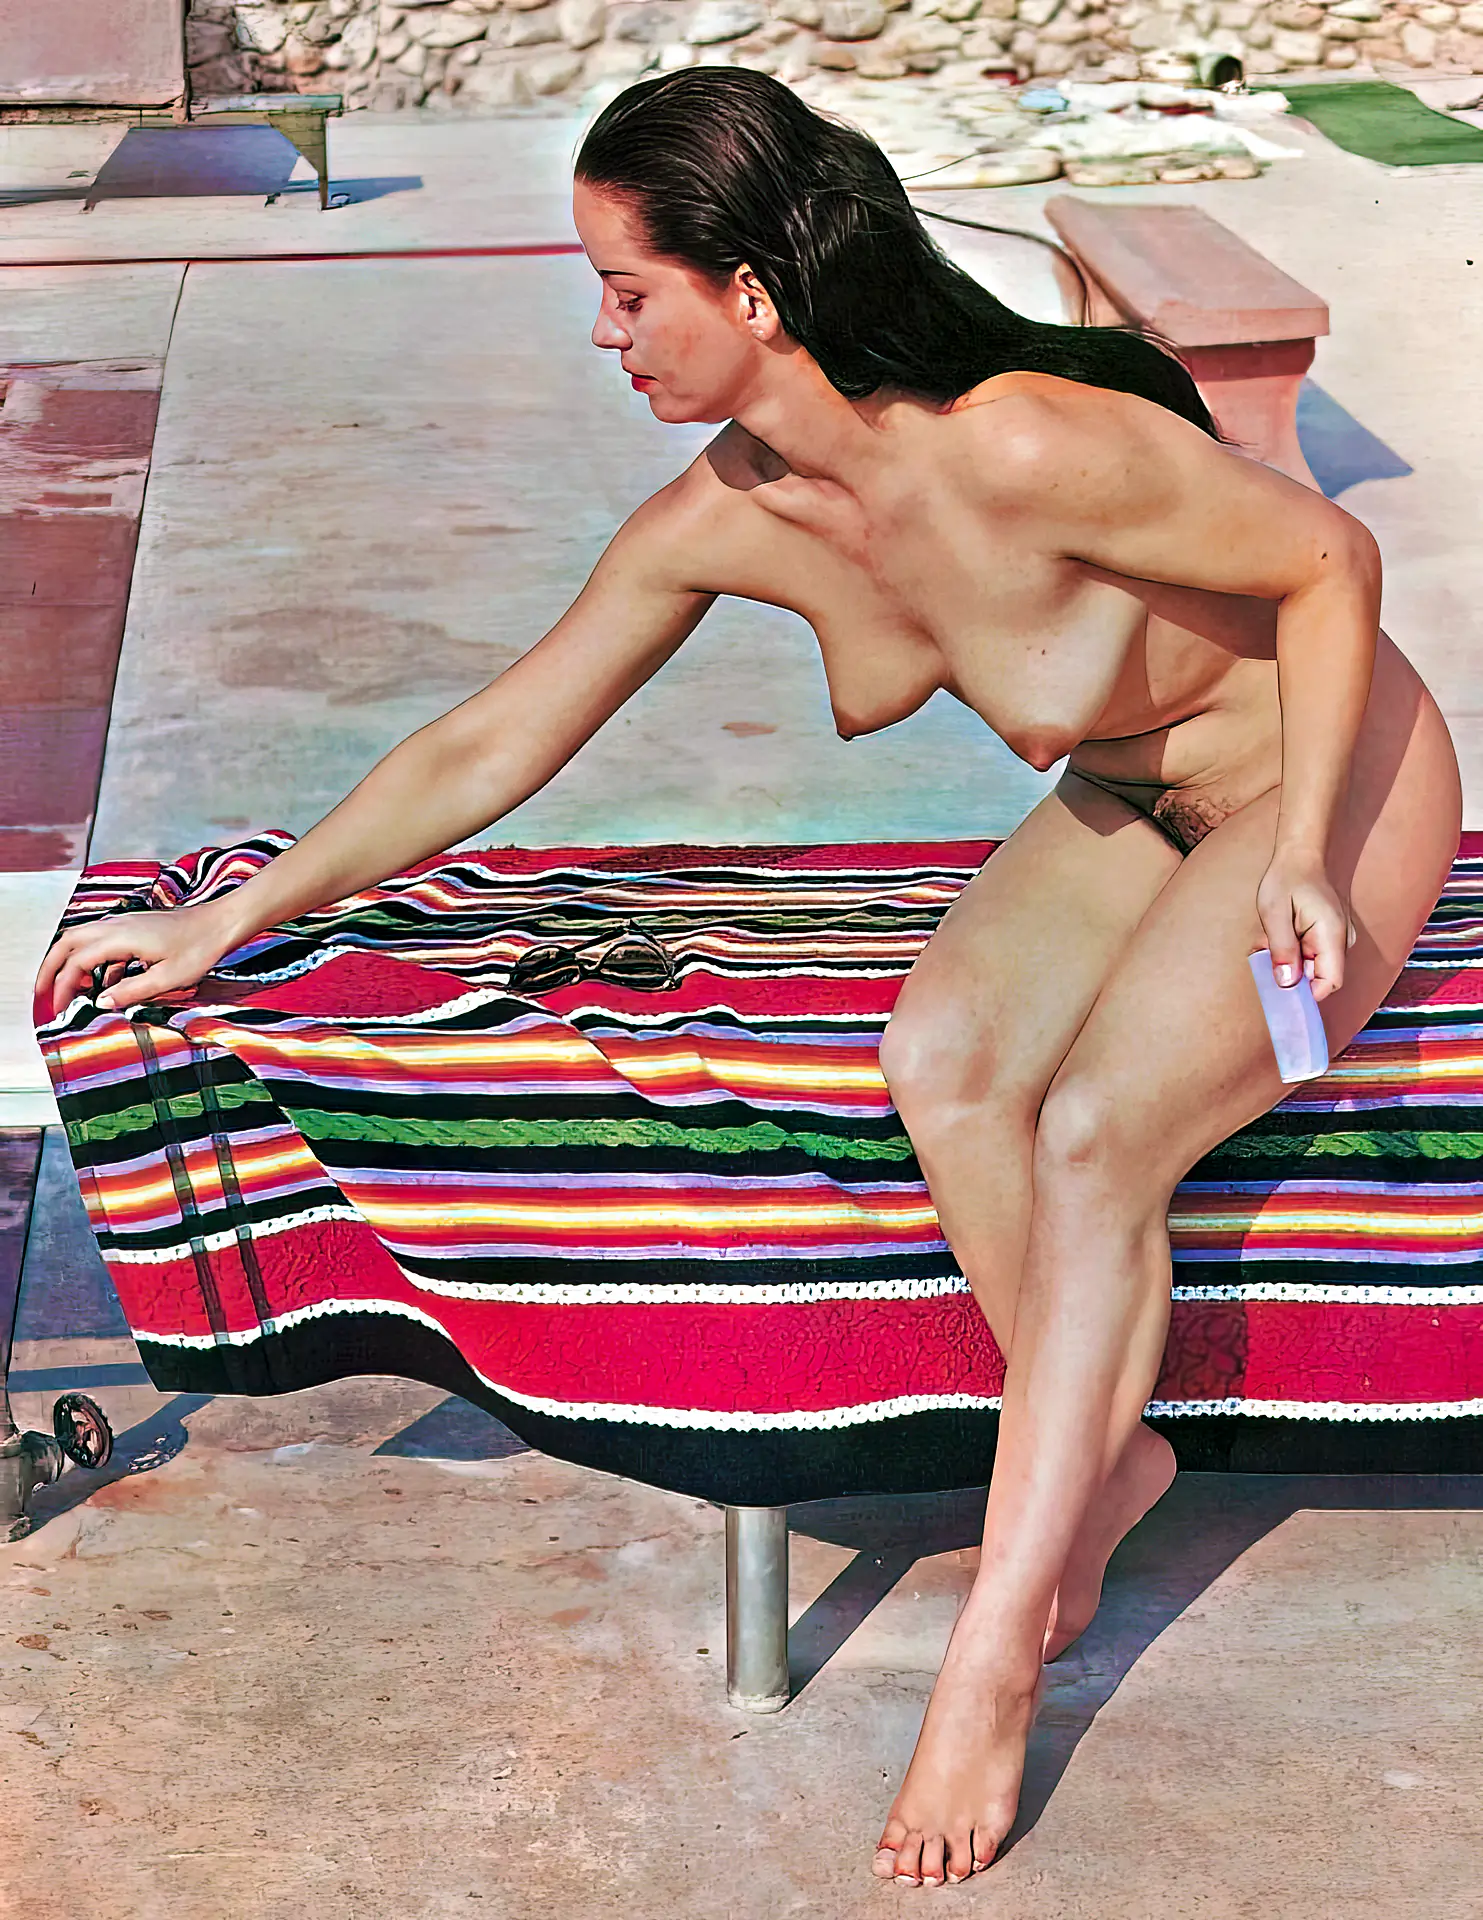 Vintage centerfold porn photos with completely nude Diane Webber, with perky breasts and hairy pussy is preparing her towel for sunbathing